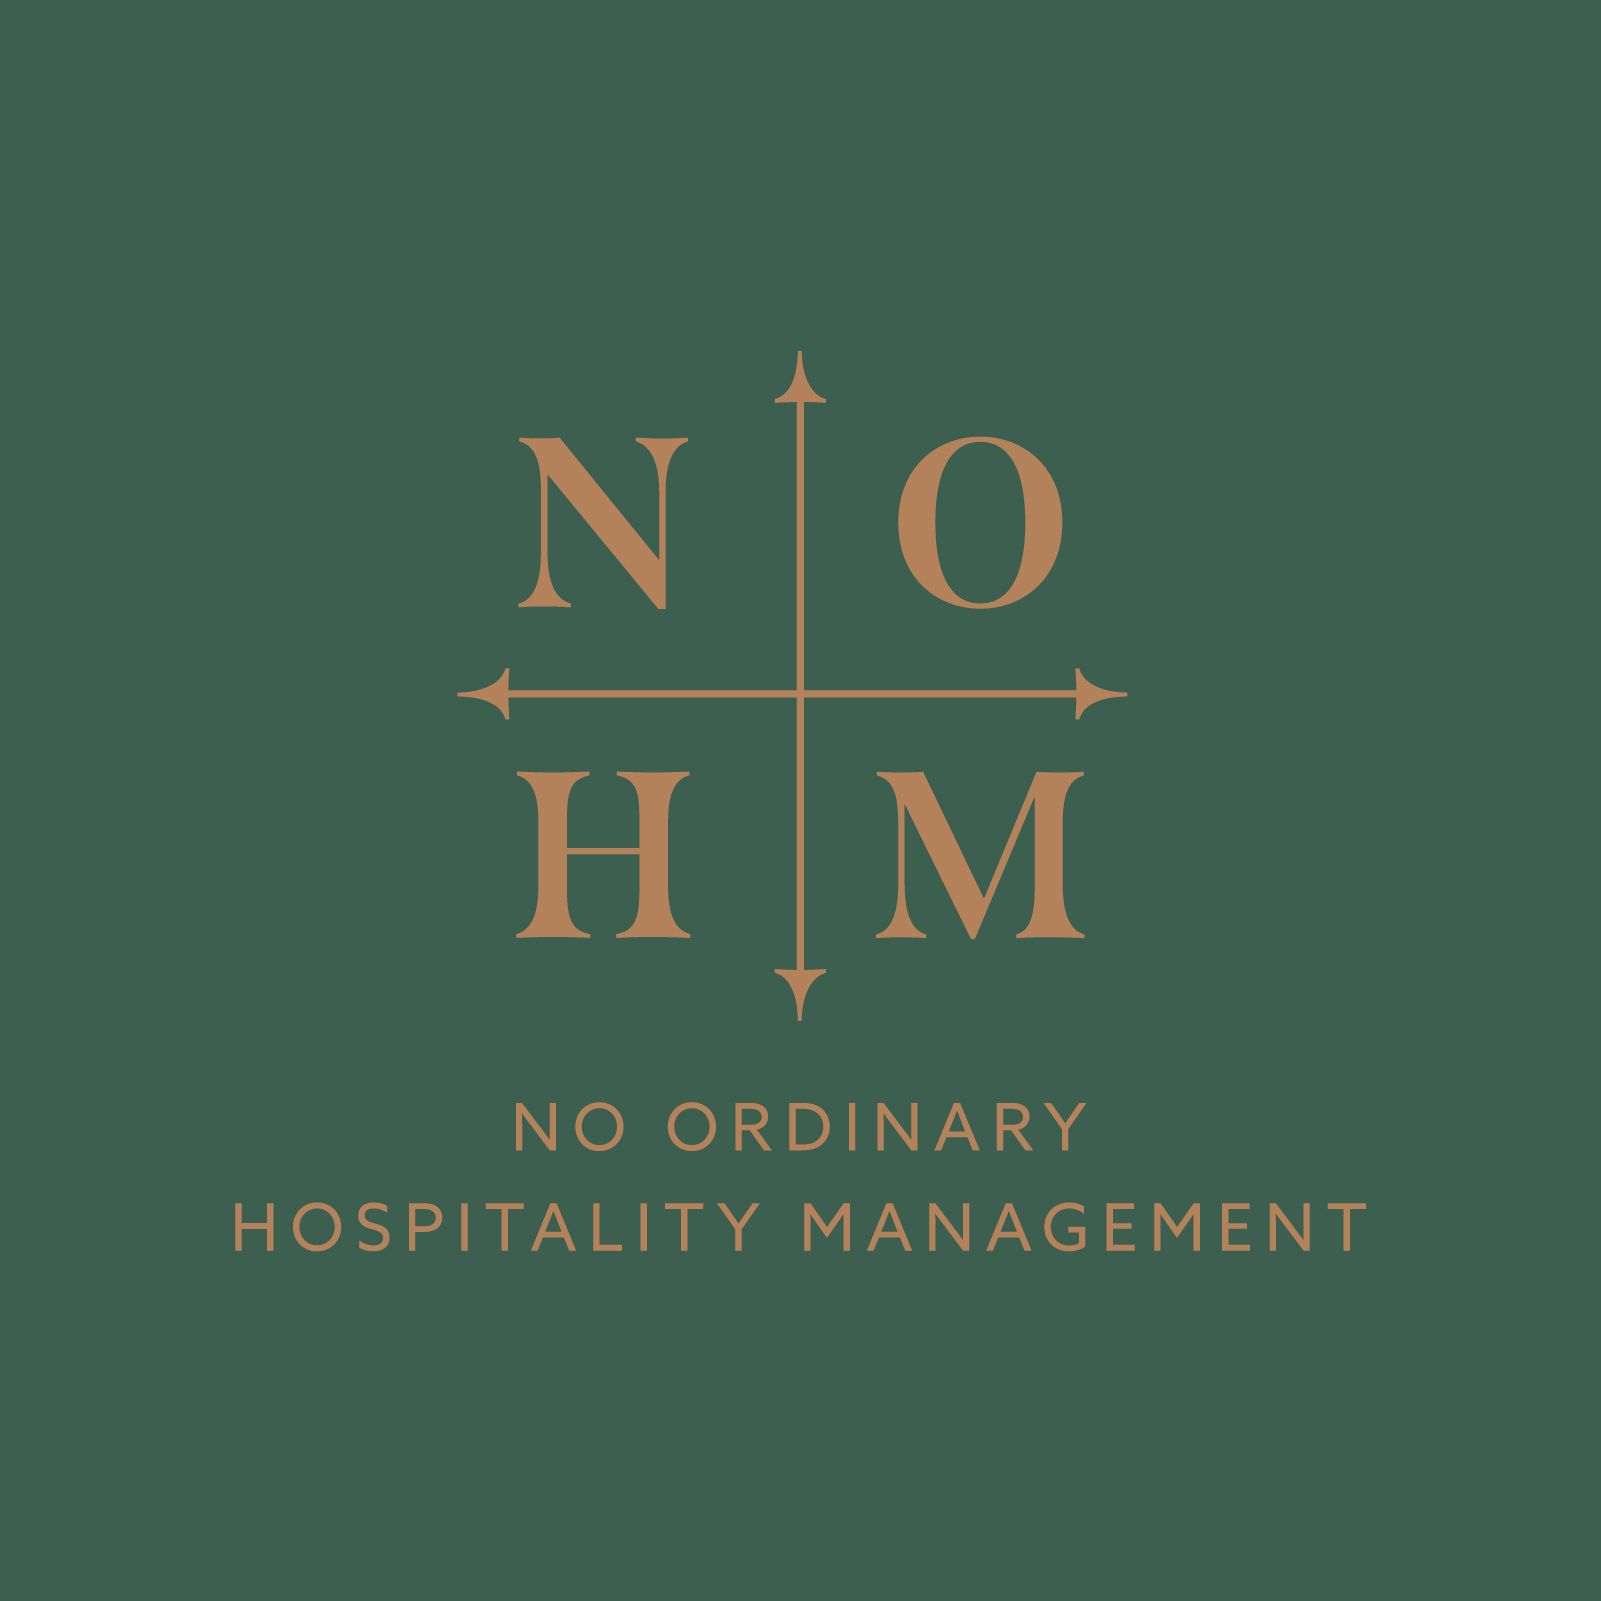 Learn more about No Ordinary Hospitality Management